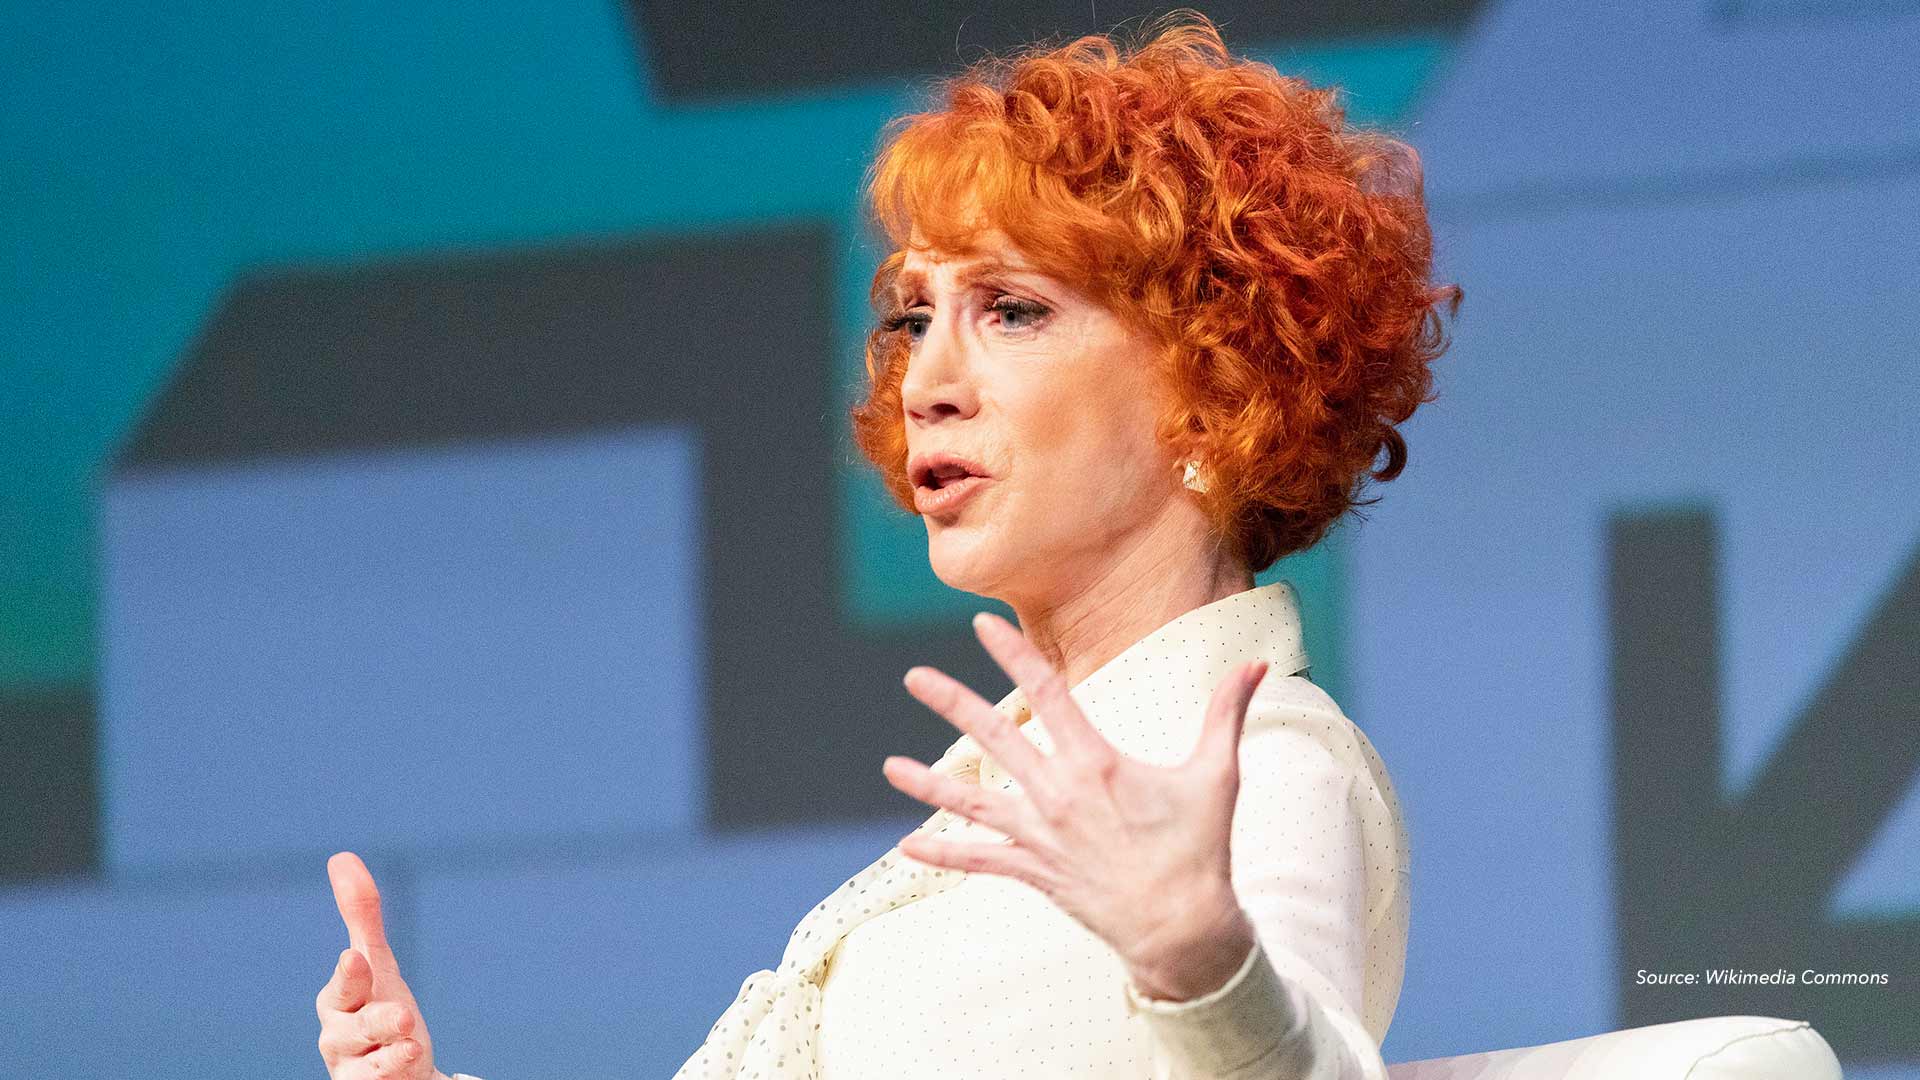 Kathy Griffin, comedian